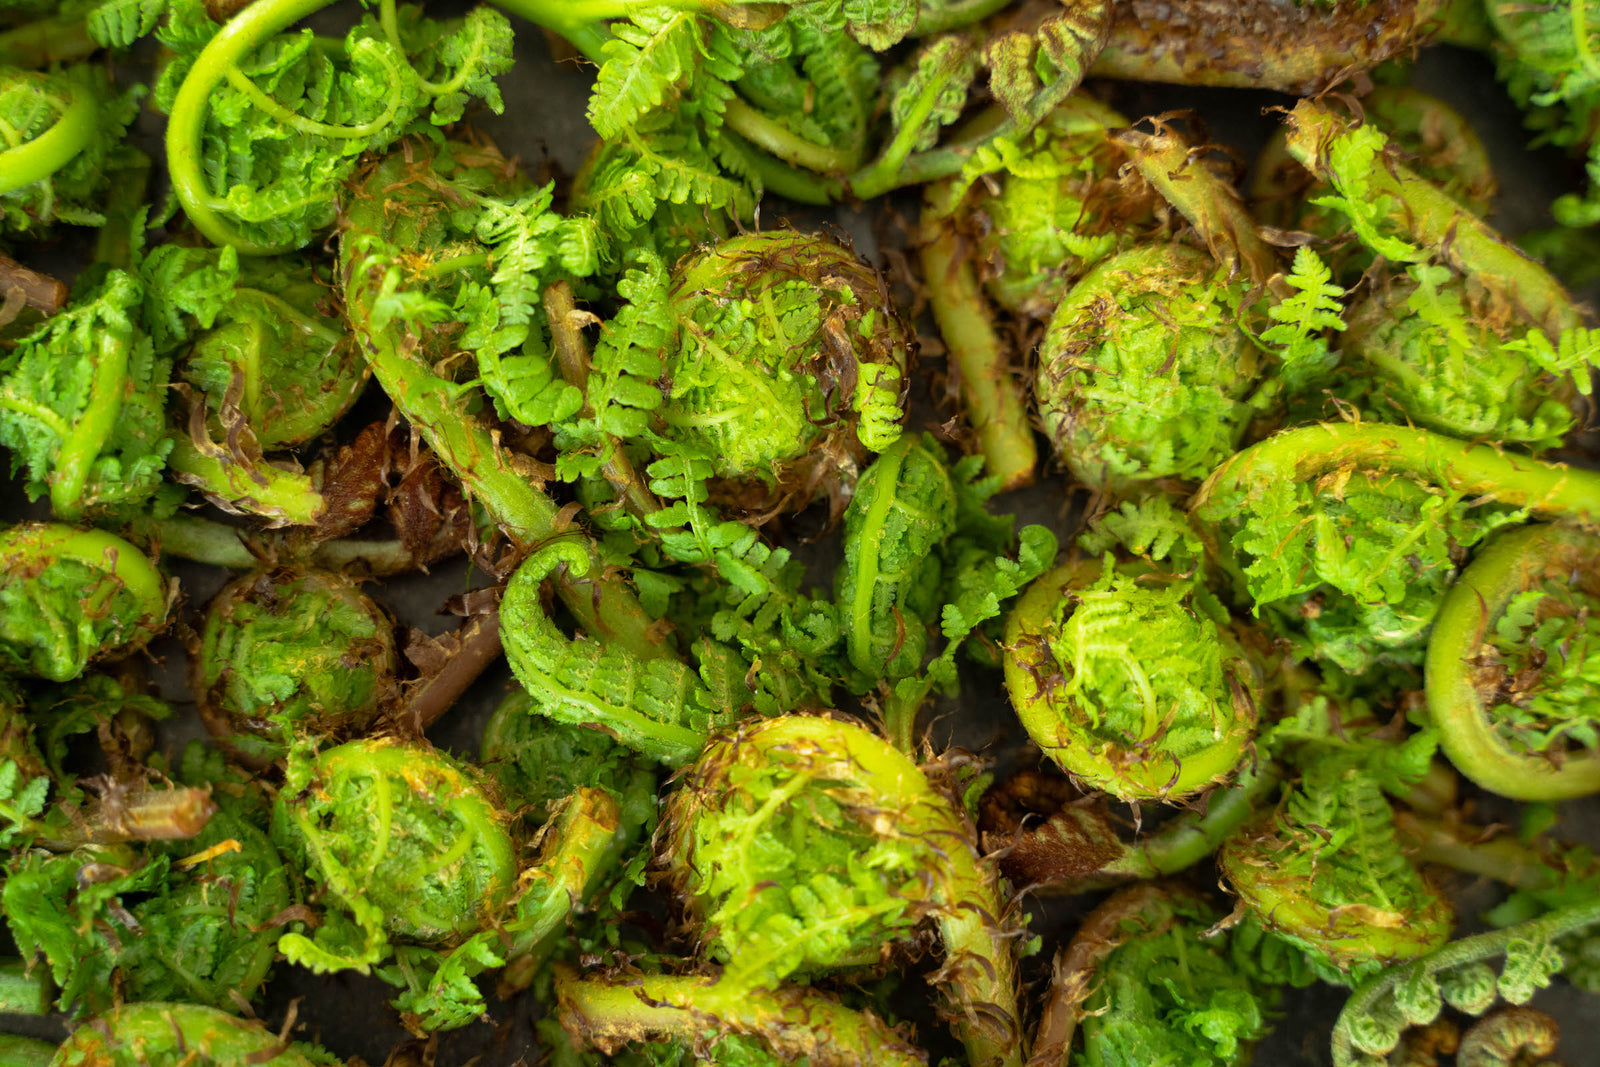 A pile of lady fern fiddleheads harvested from the forest